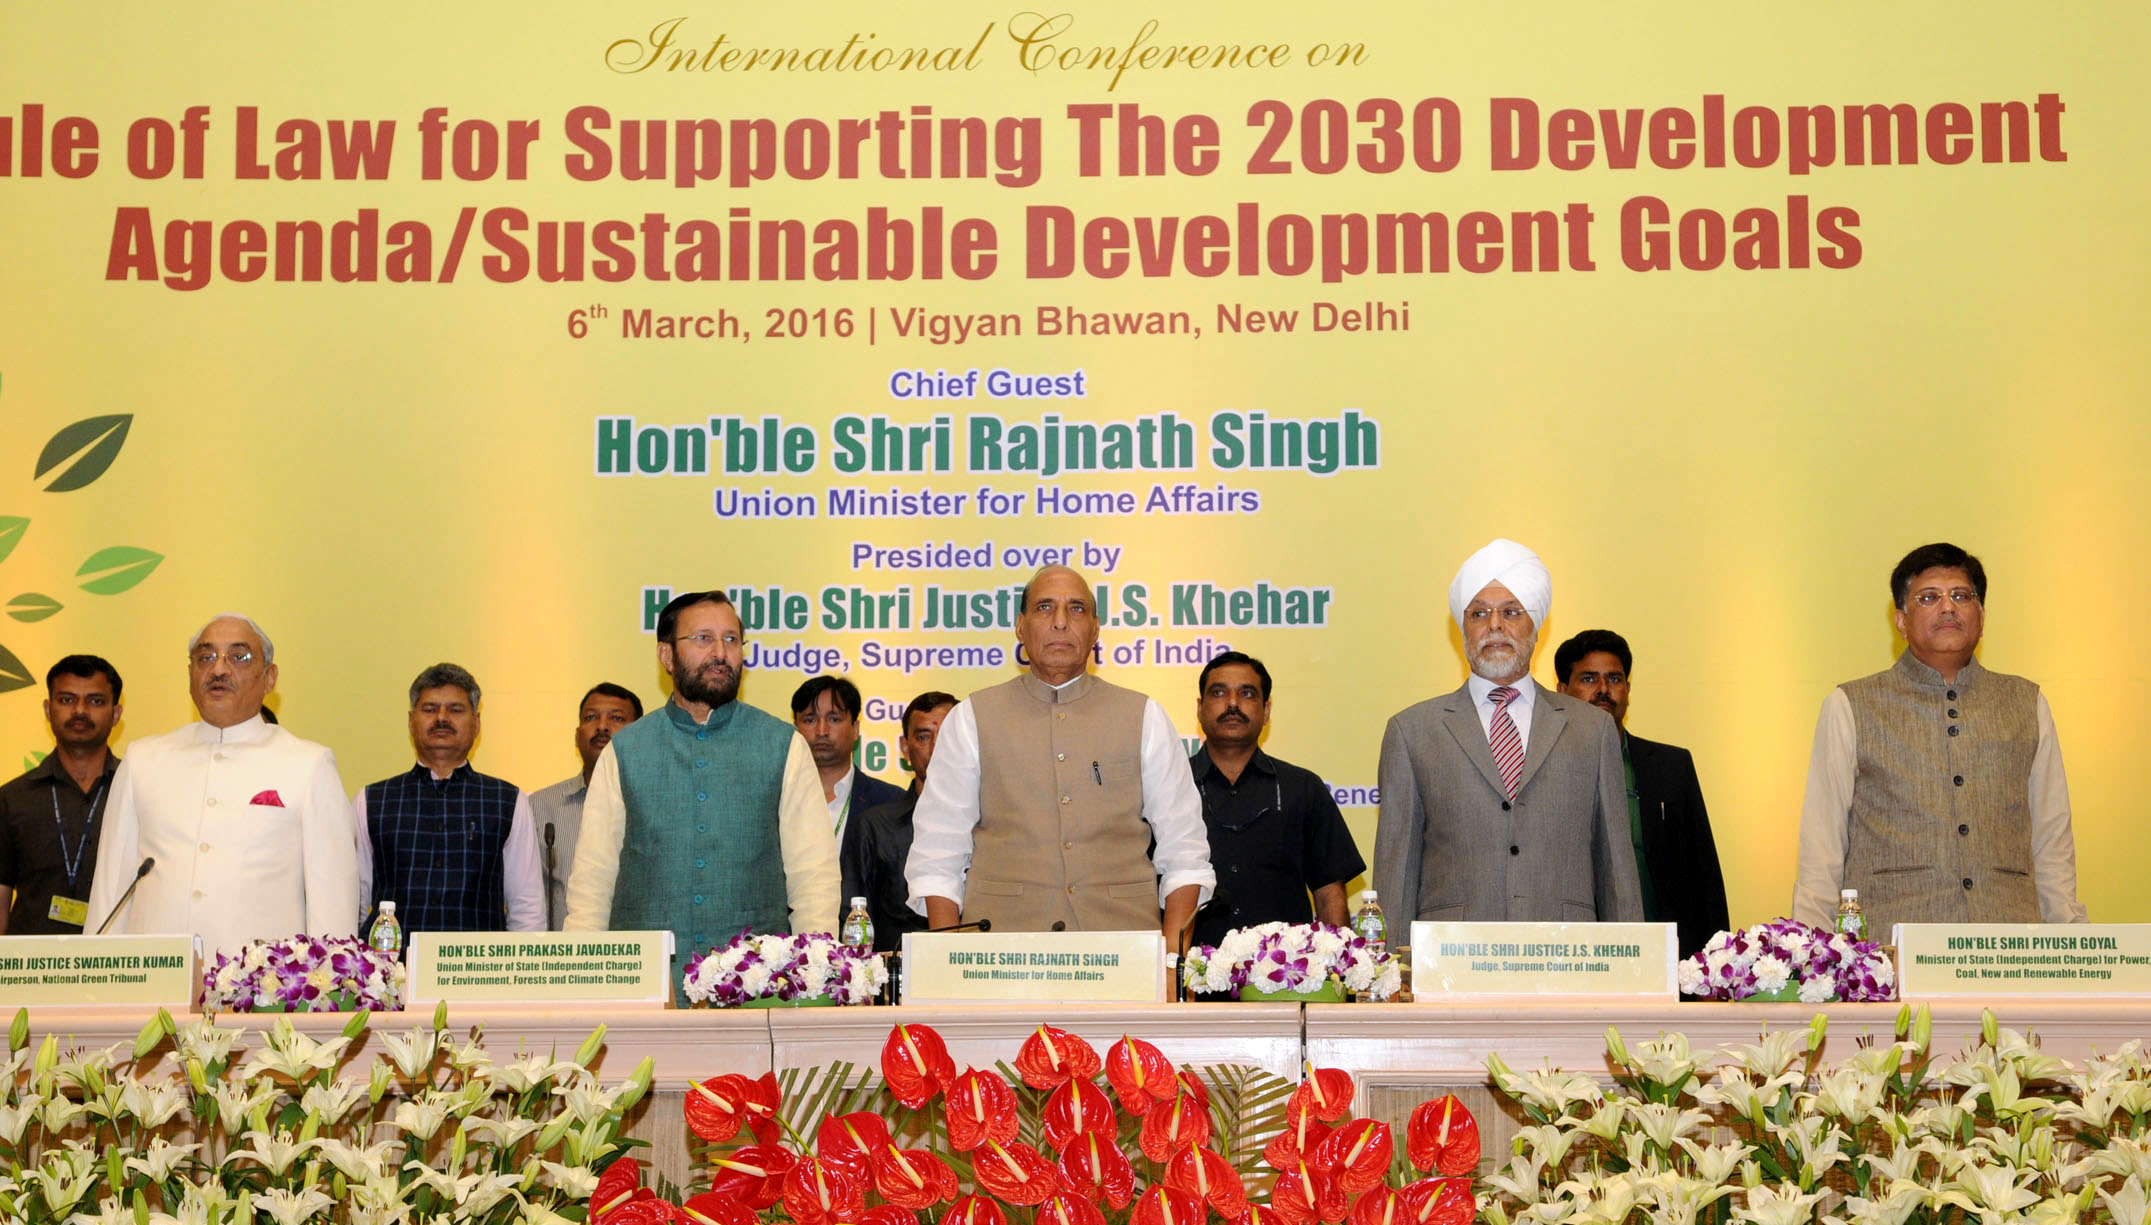 The Union Home Minister, Shri Rajnath Singh  at the Valedictory session of the International Conference on Rule of Law for Supporting 2030 Development Agenda, in New Delhi on March 06, 2016.  The Minister of State (Independent Charge) for Power, Coal and New and Renewable Energy, Shri Piyush Goyal, the Minister of State for Environment, Forest and Climate Change (Independent Charge), Shri Prakash Javadekar and other dignitaries are also seen.